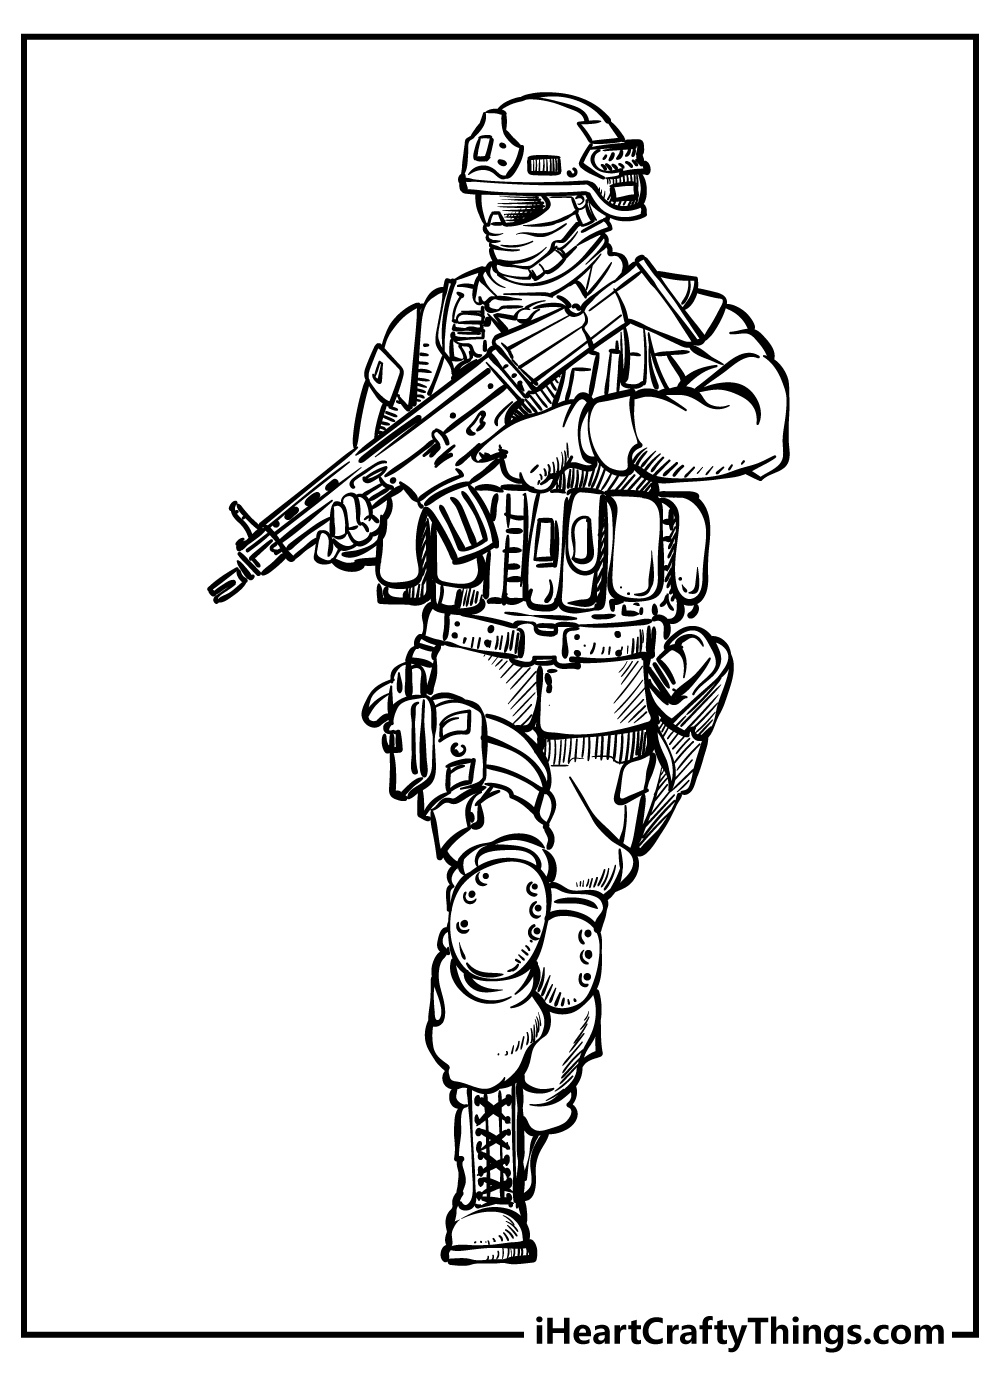 Army Coloring Pages for kids free download